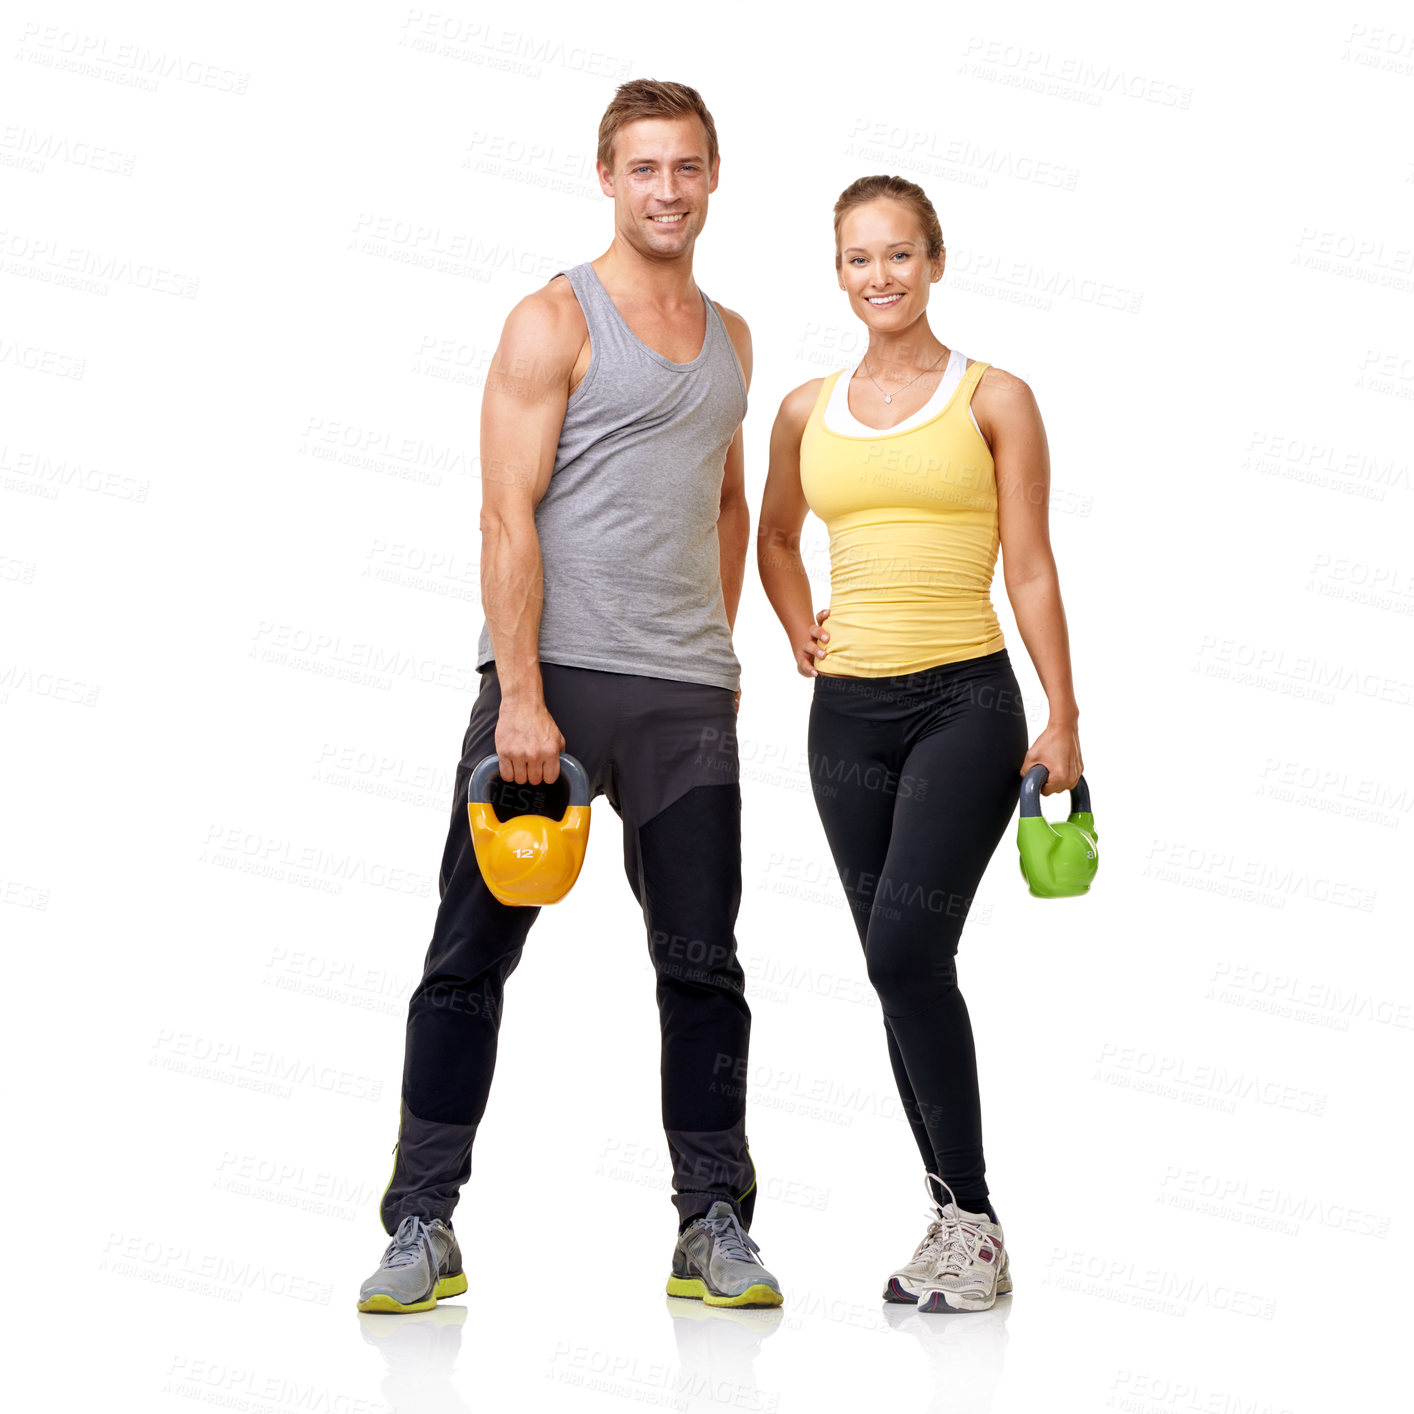 Buy stock photo Studio shot of of two people with weights isolated on white